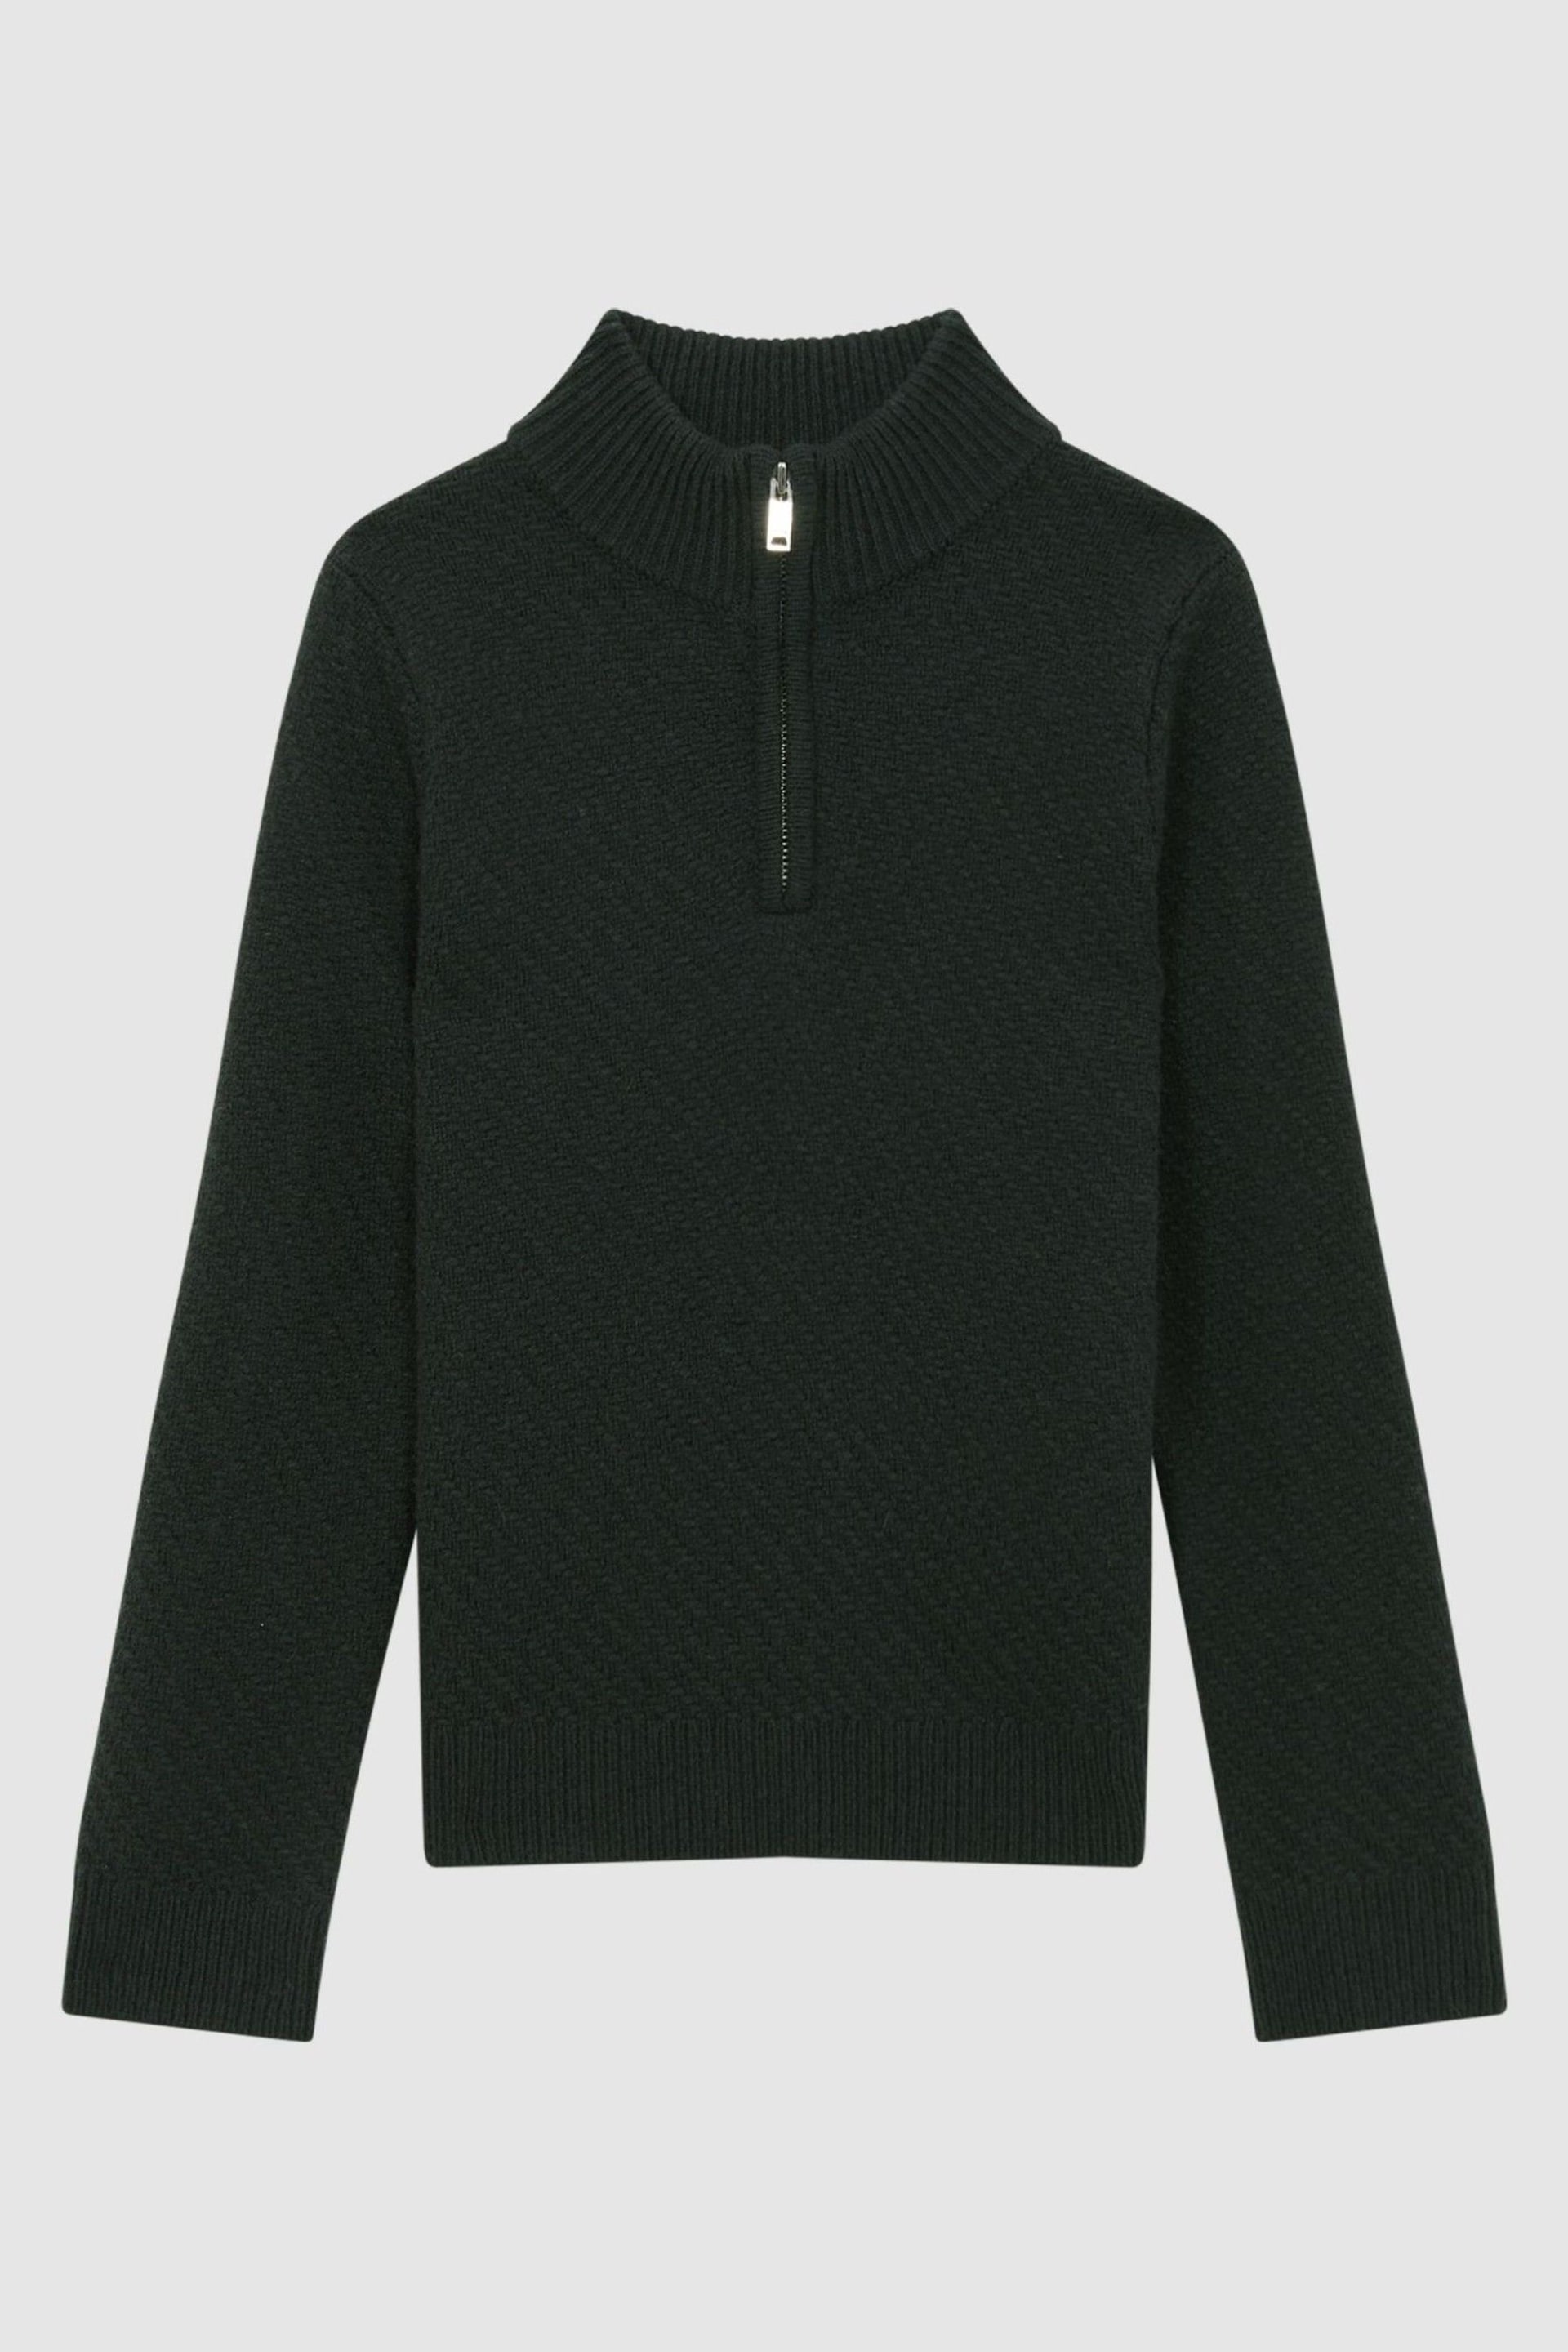 Reiss Forest Green Tempo Junior Slim Fit Knitted Half-Zip Funnel Neck Jumper - Image 2 of 5